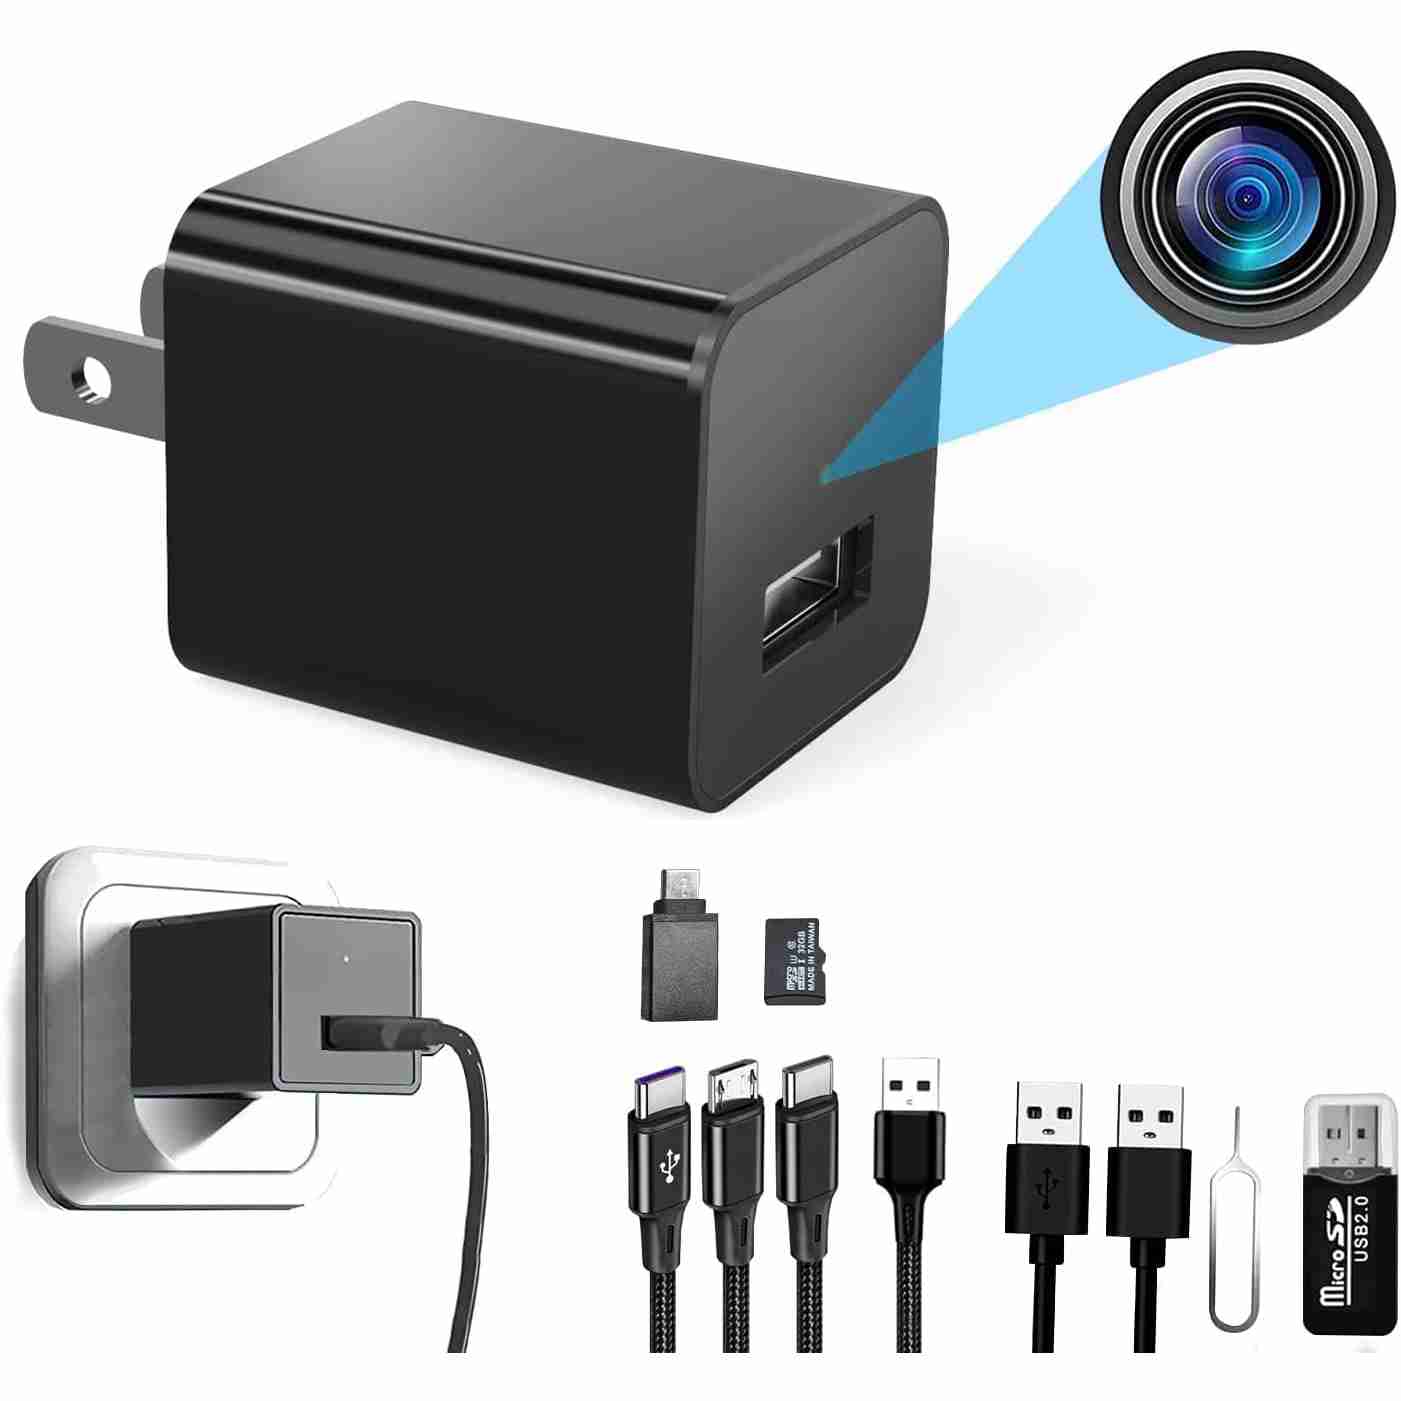 hidden-camera-charger-1080p with cash back rebate